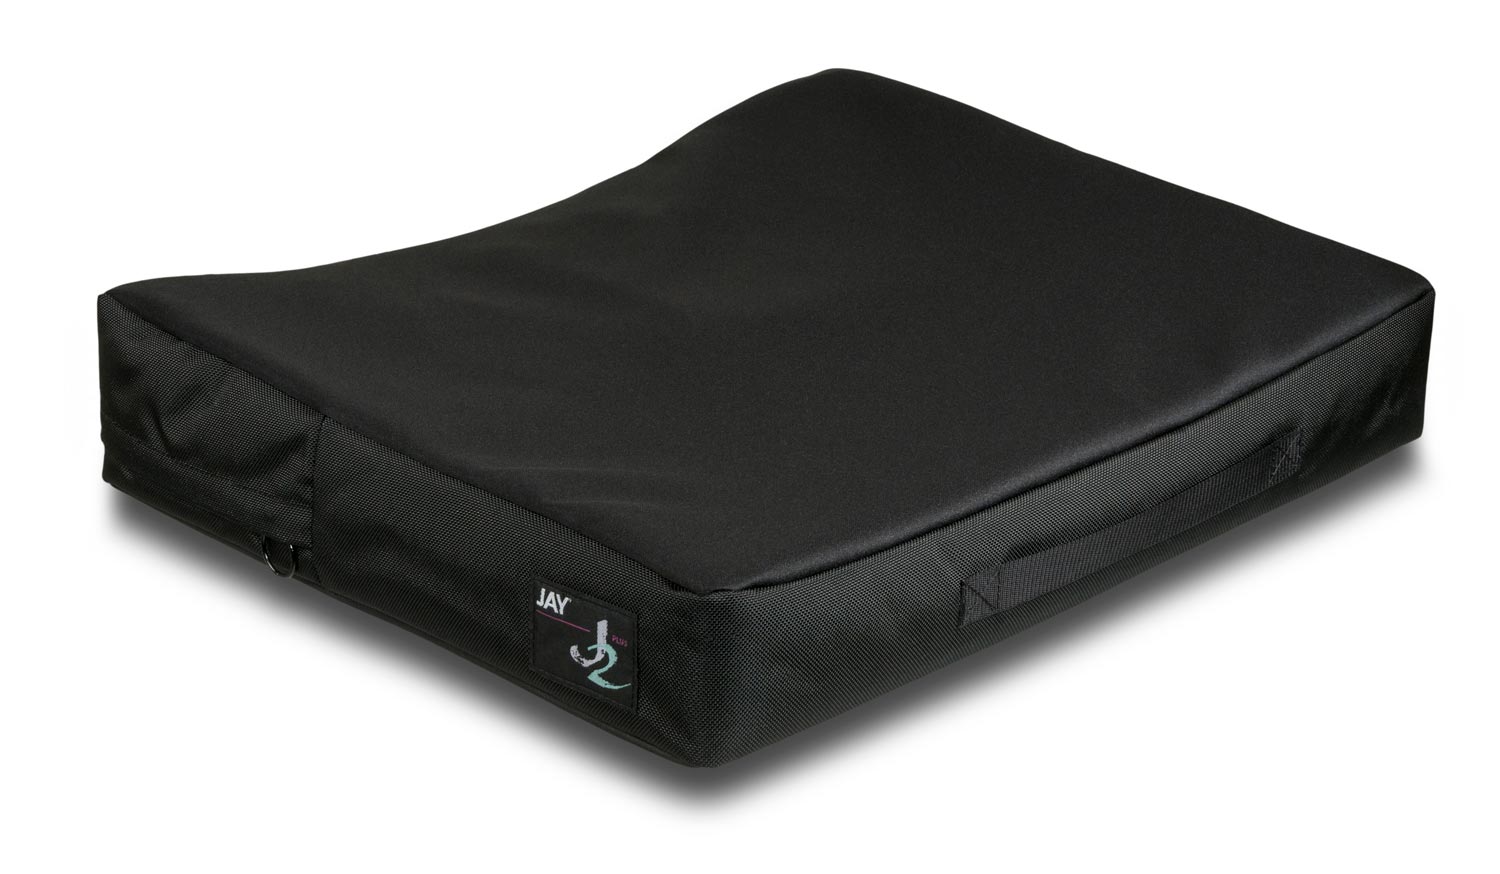 https://www.sunrisemedical.com/getattachment/seating-positioning/Jay/Wheelchair-Cushions/J2-Plus-Cushion/Product-Features/4-AirExchange-and-Moisture-Resistant-Cover-Option/JAY_J2_Plus_feature4.jpg.aspx?lang=en-US&width=1500&height=874&ext=.jpg%}?width=960